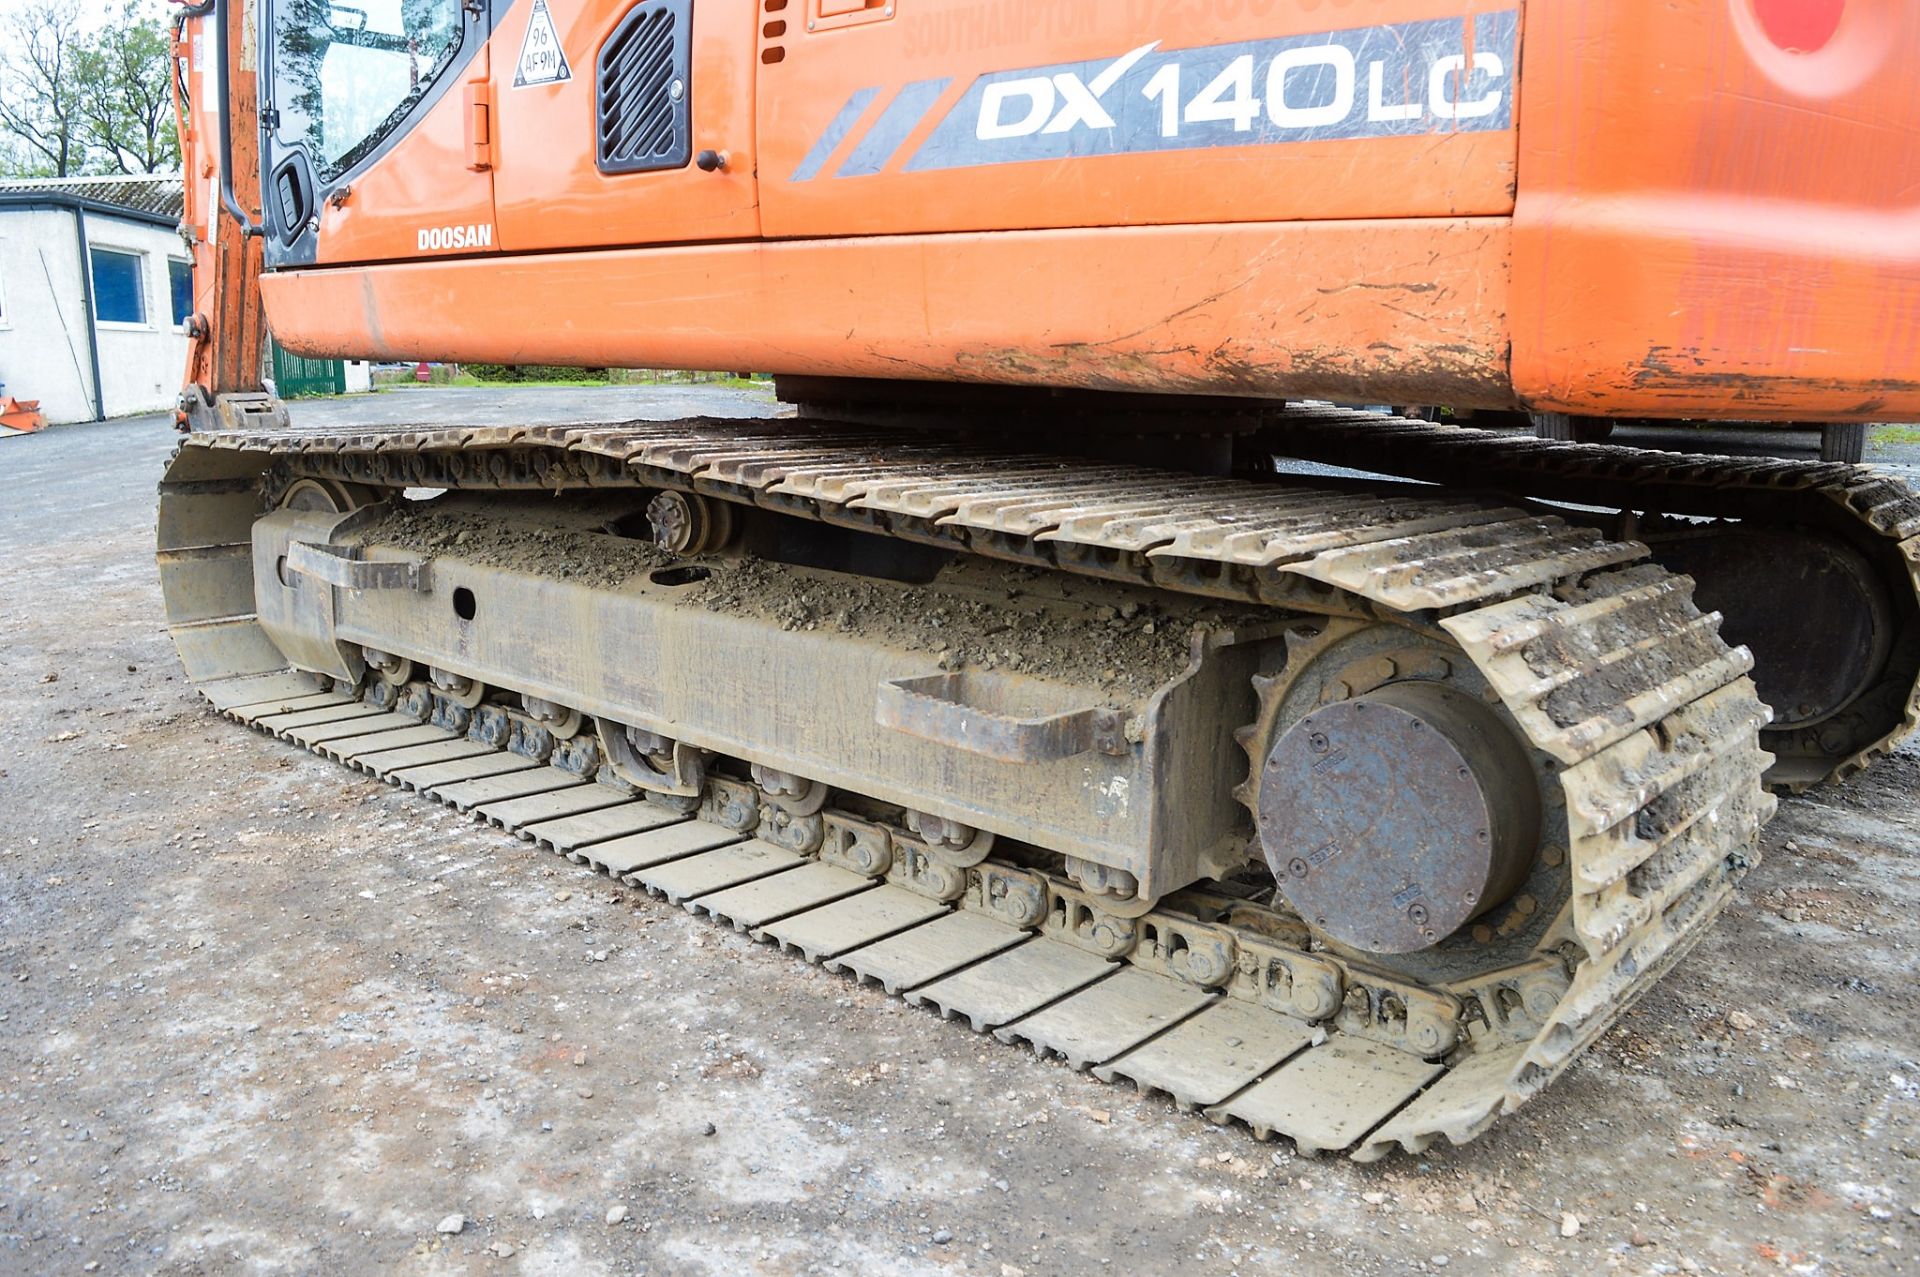 Doosan DX140LC 14 tonne steel tracked excavator Year: 2012 S/N: C0050803 Recorded Hours: 5627 piped, - Image 7 of 12